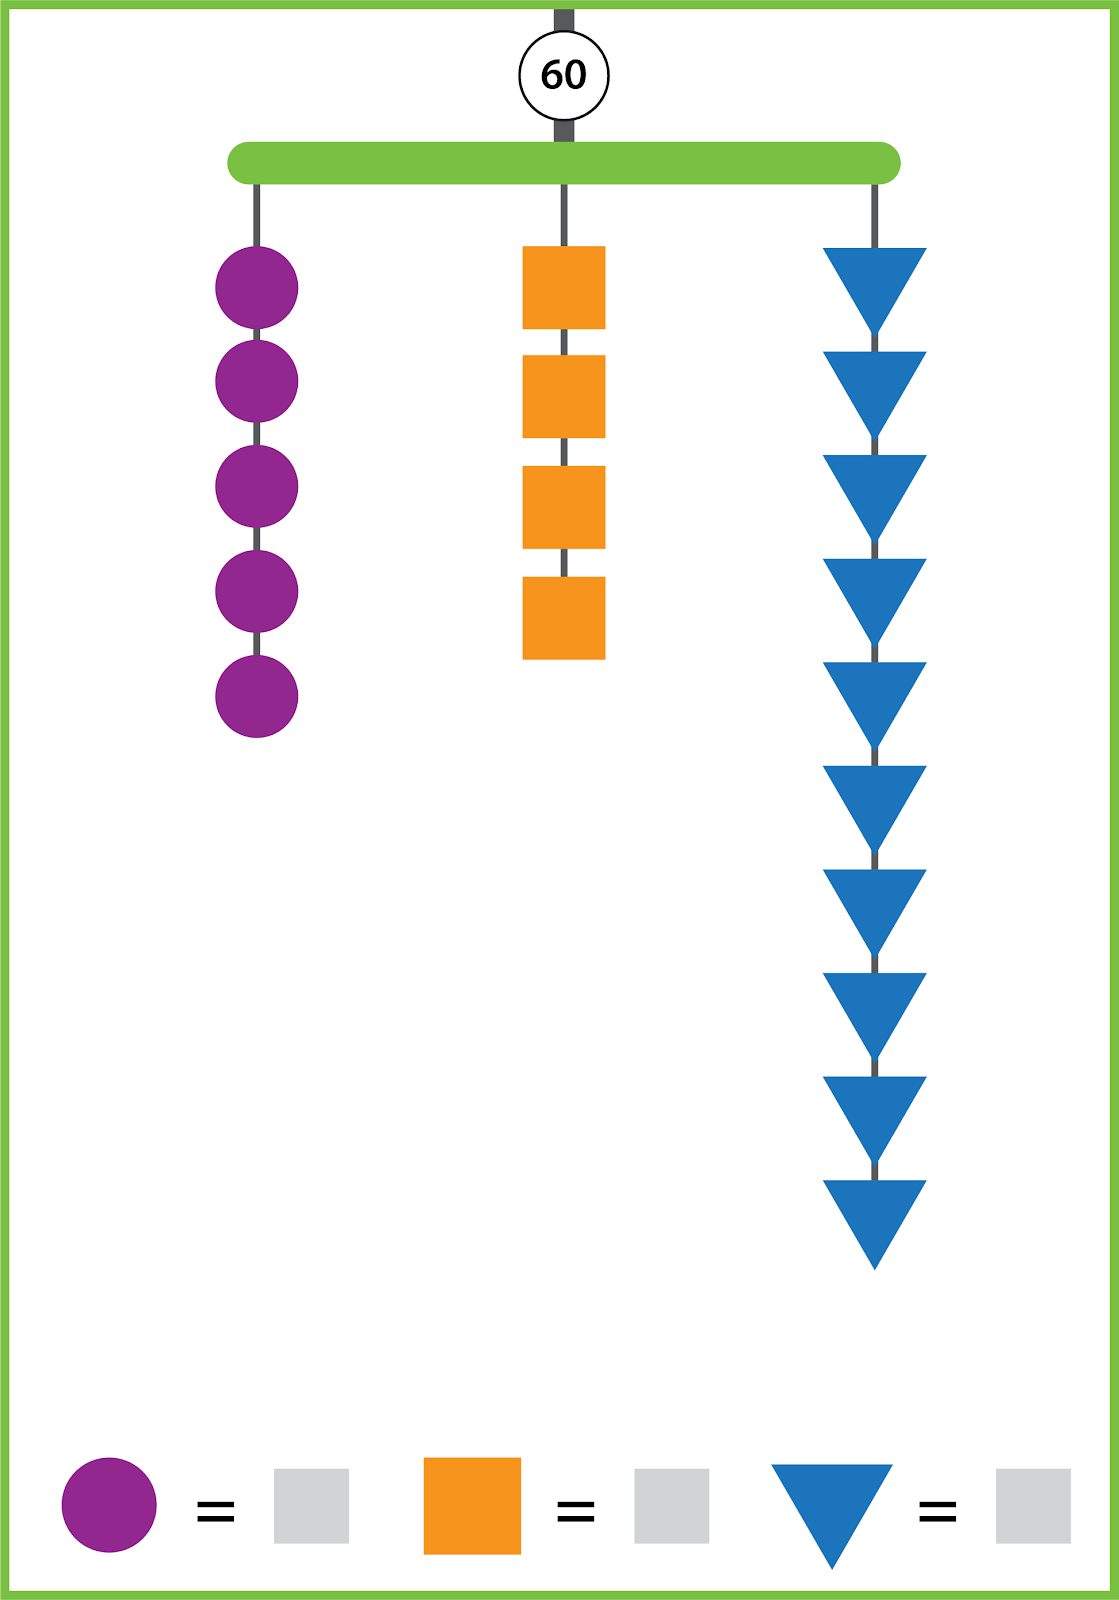 A balanced mobile has three strings and a total value of 60. The left string has 5 purple circles. The middle string has 4 orange squares. The right string has 10 blue triangles. The values of the shapes are unknown.